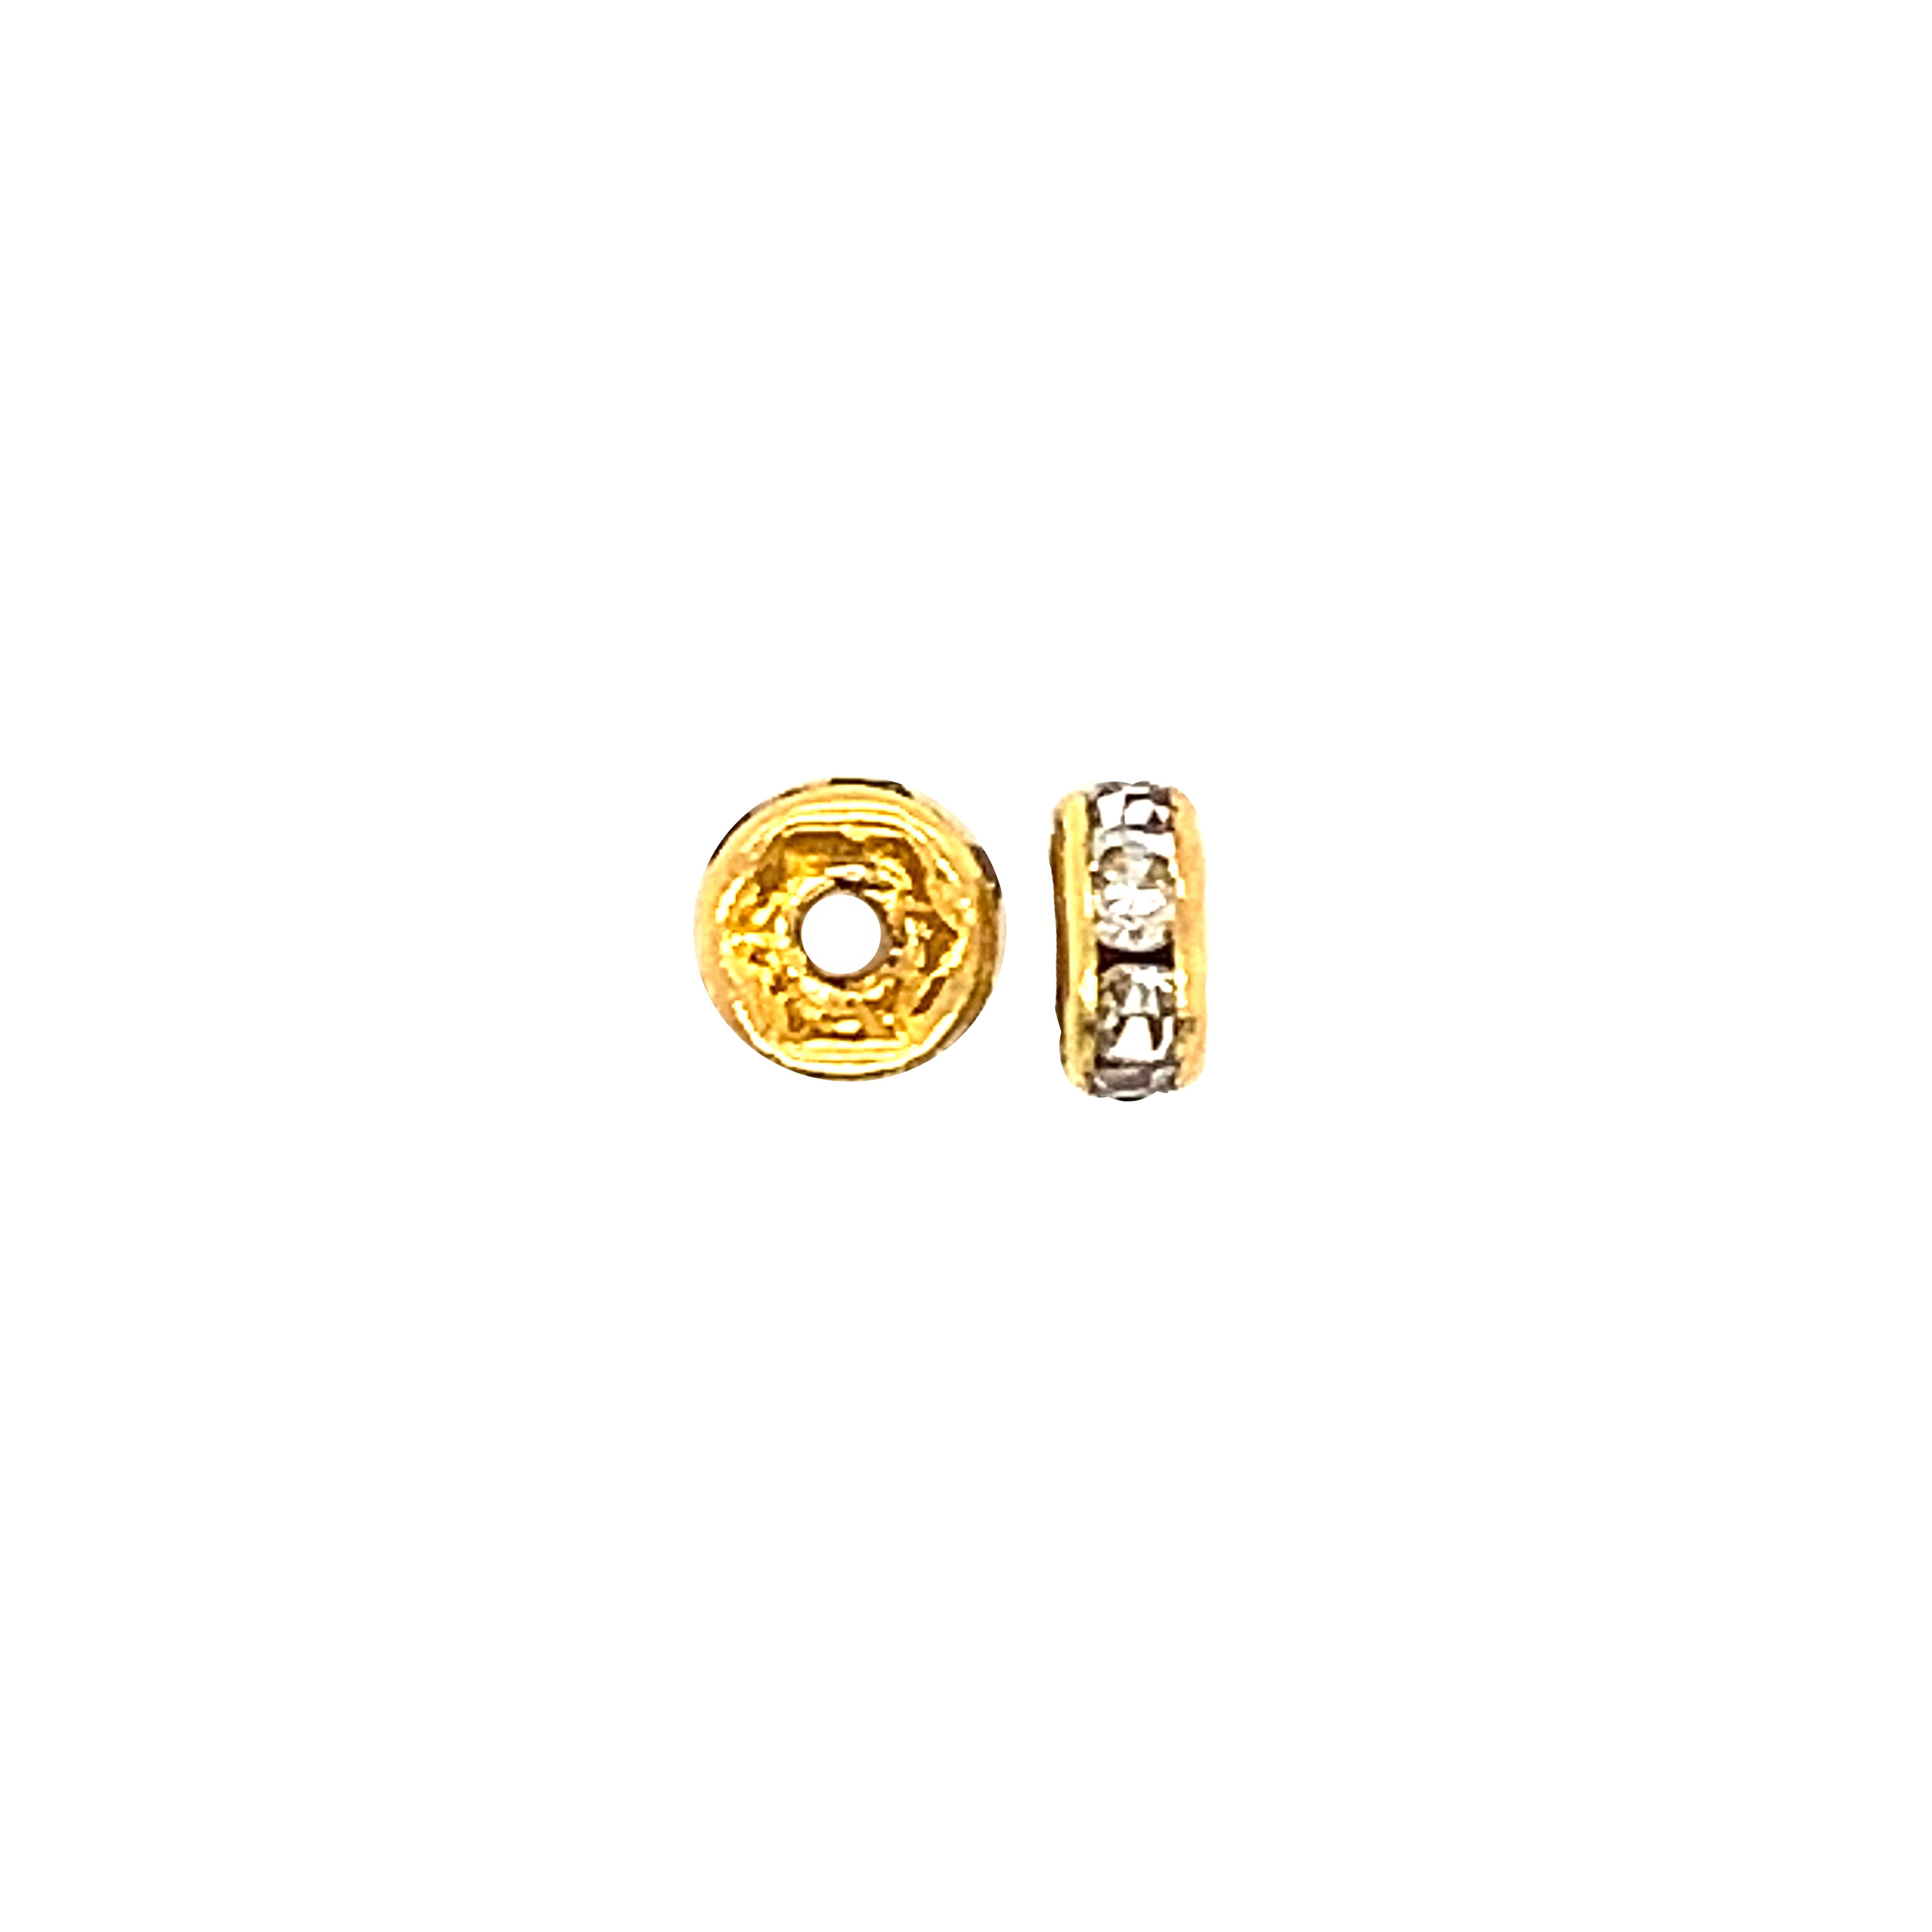 CZ 5mm Gold Tone Rondelle - Pack of 10